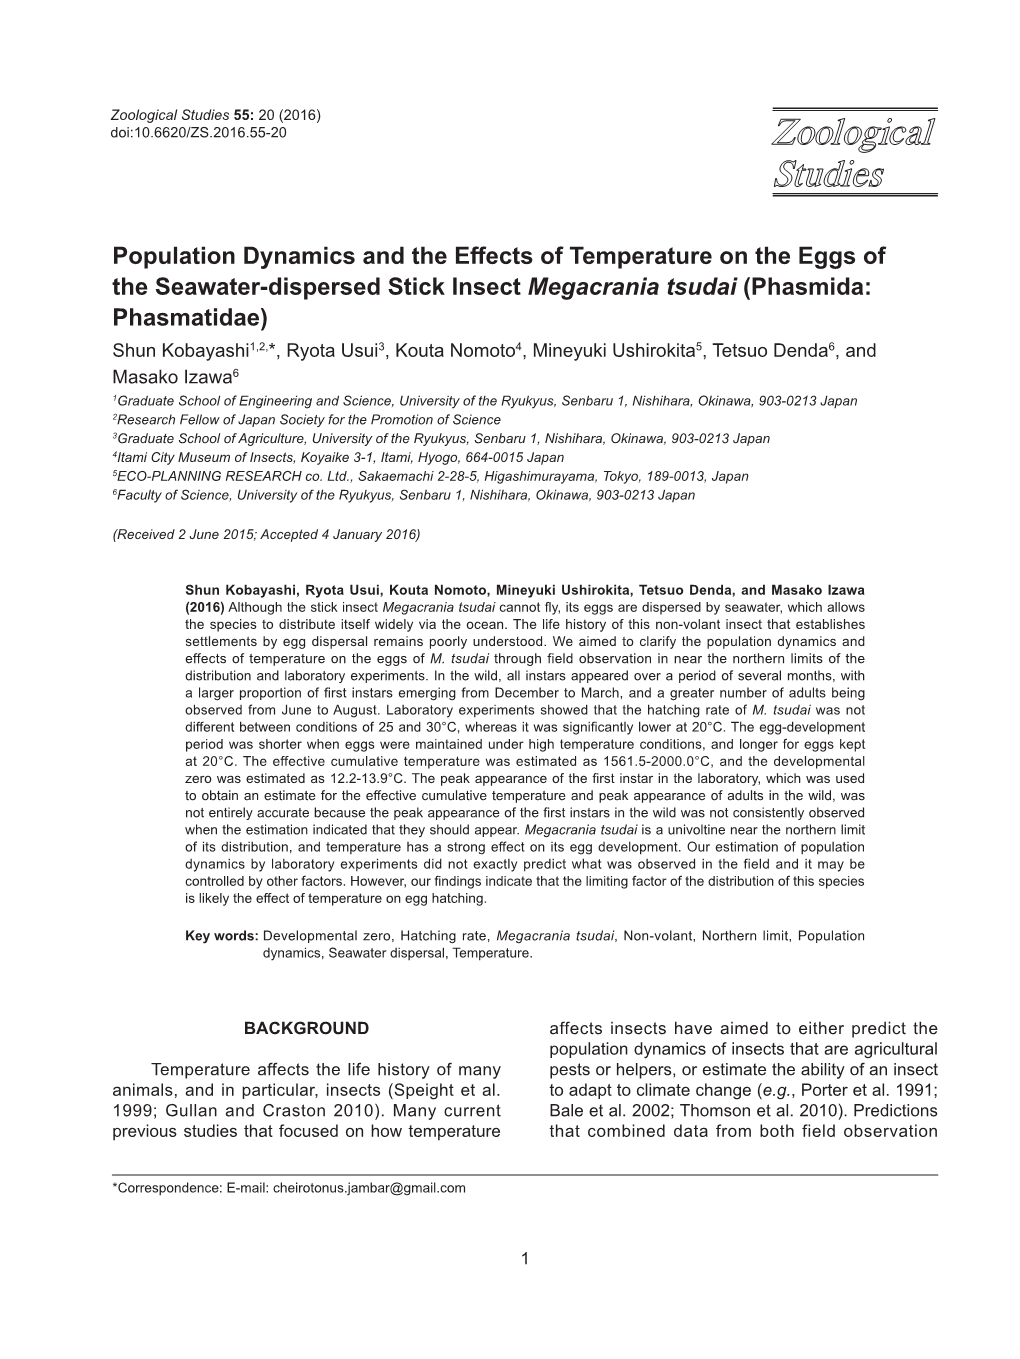 Population Dynamics and the Effects of Temperature on the Eggs of The